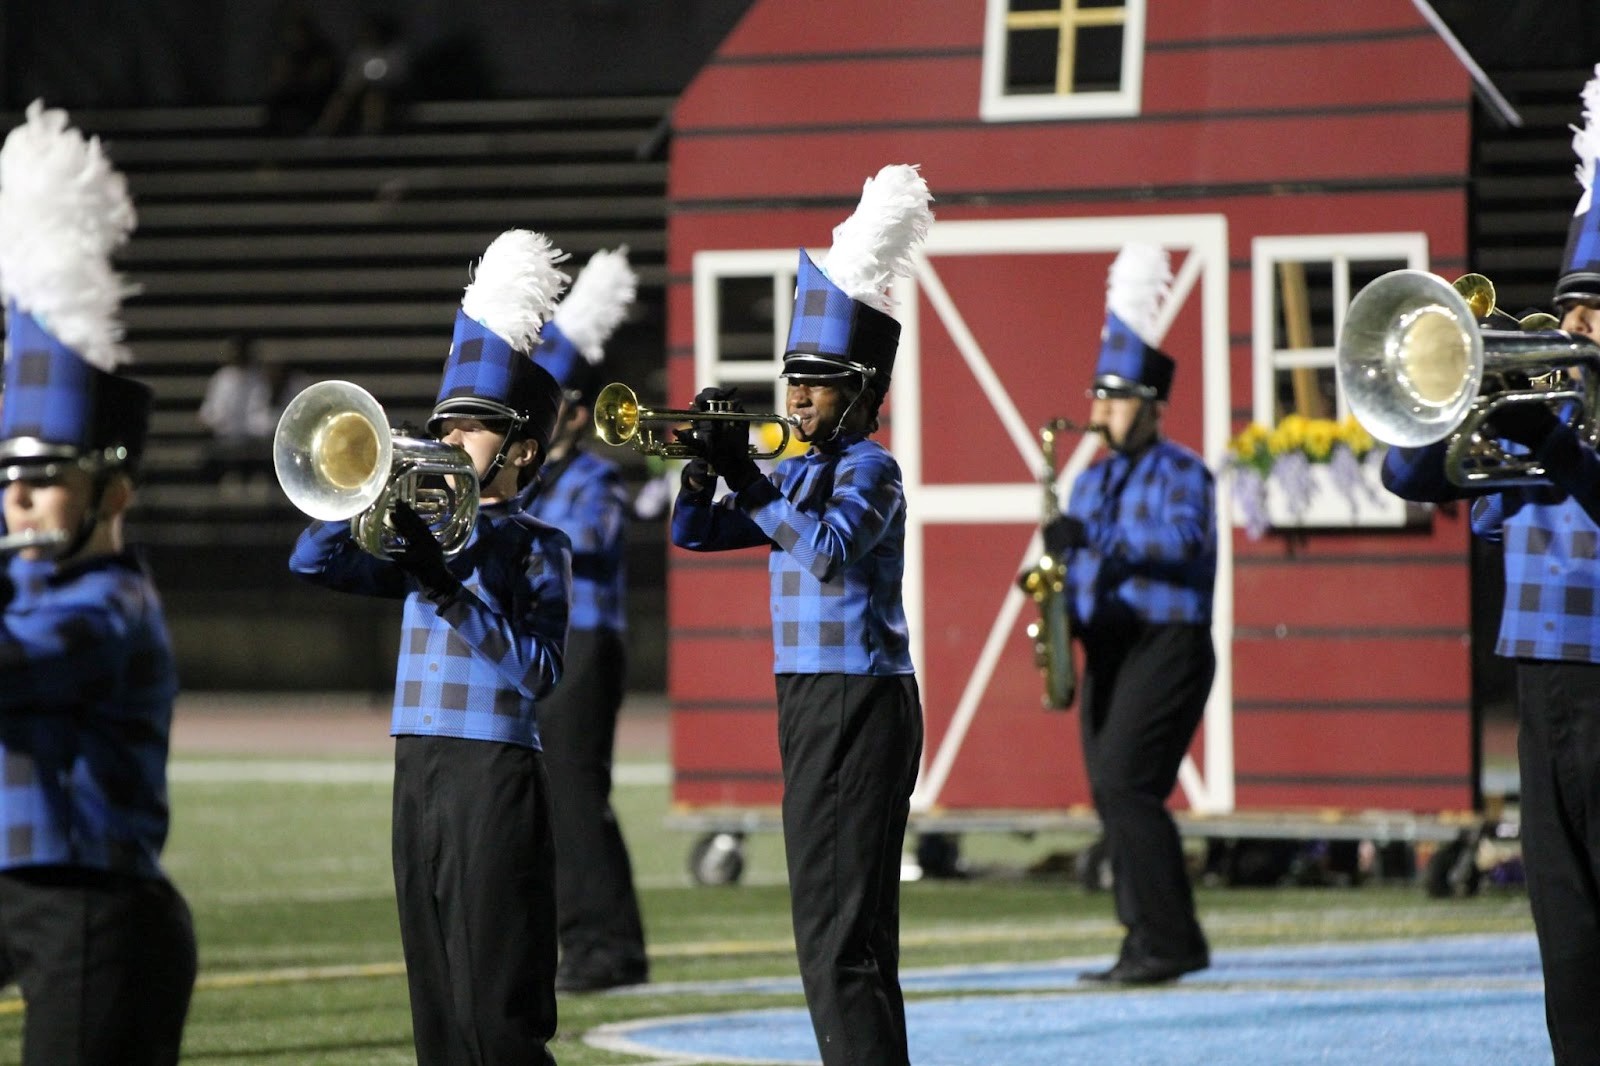 Centreville High School Wildcat Marching band